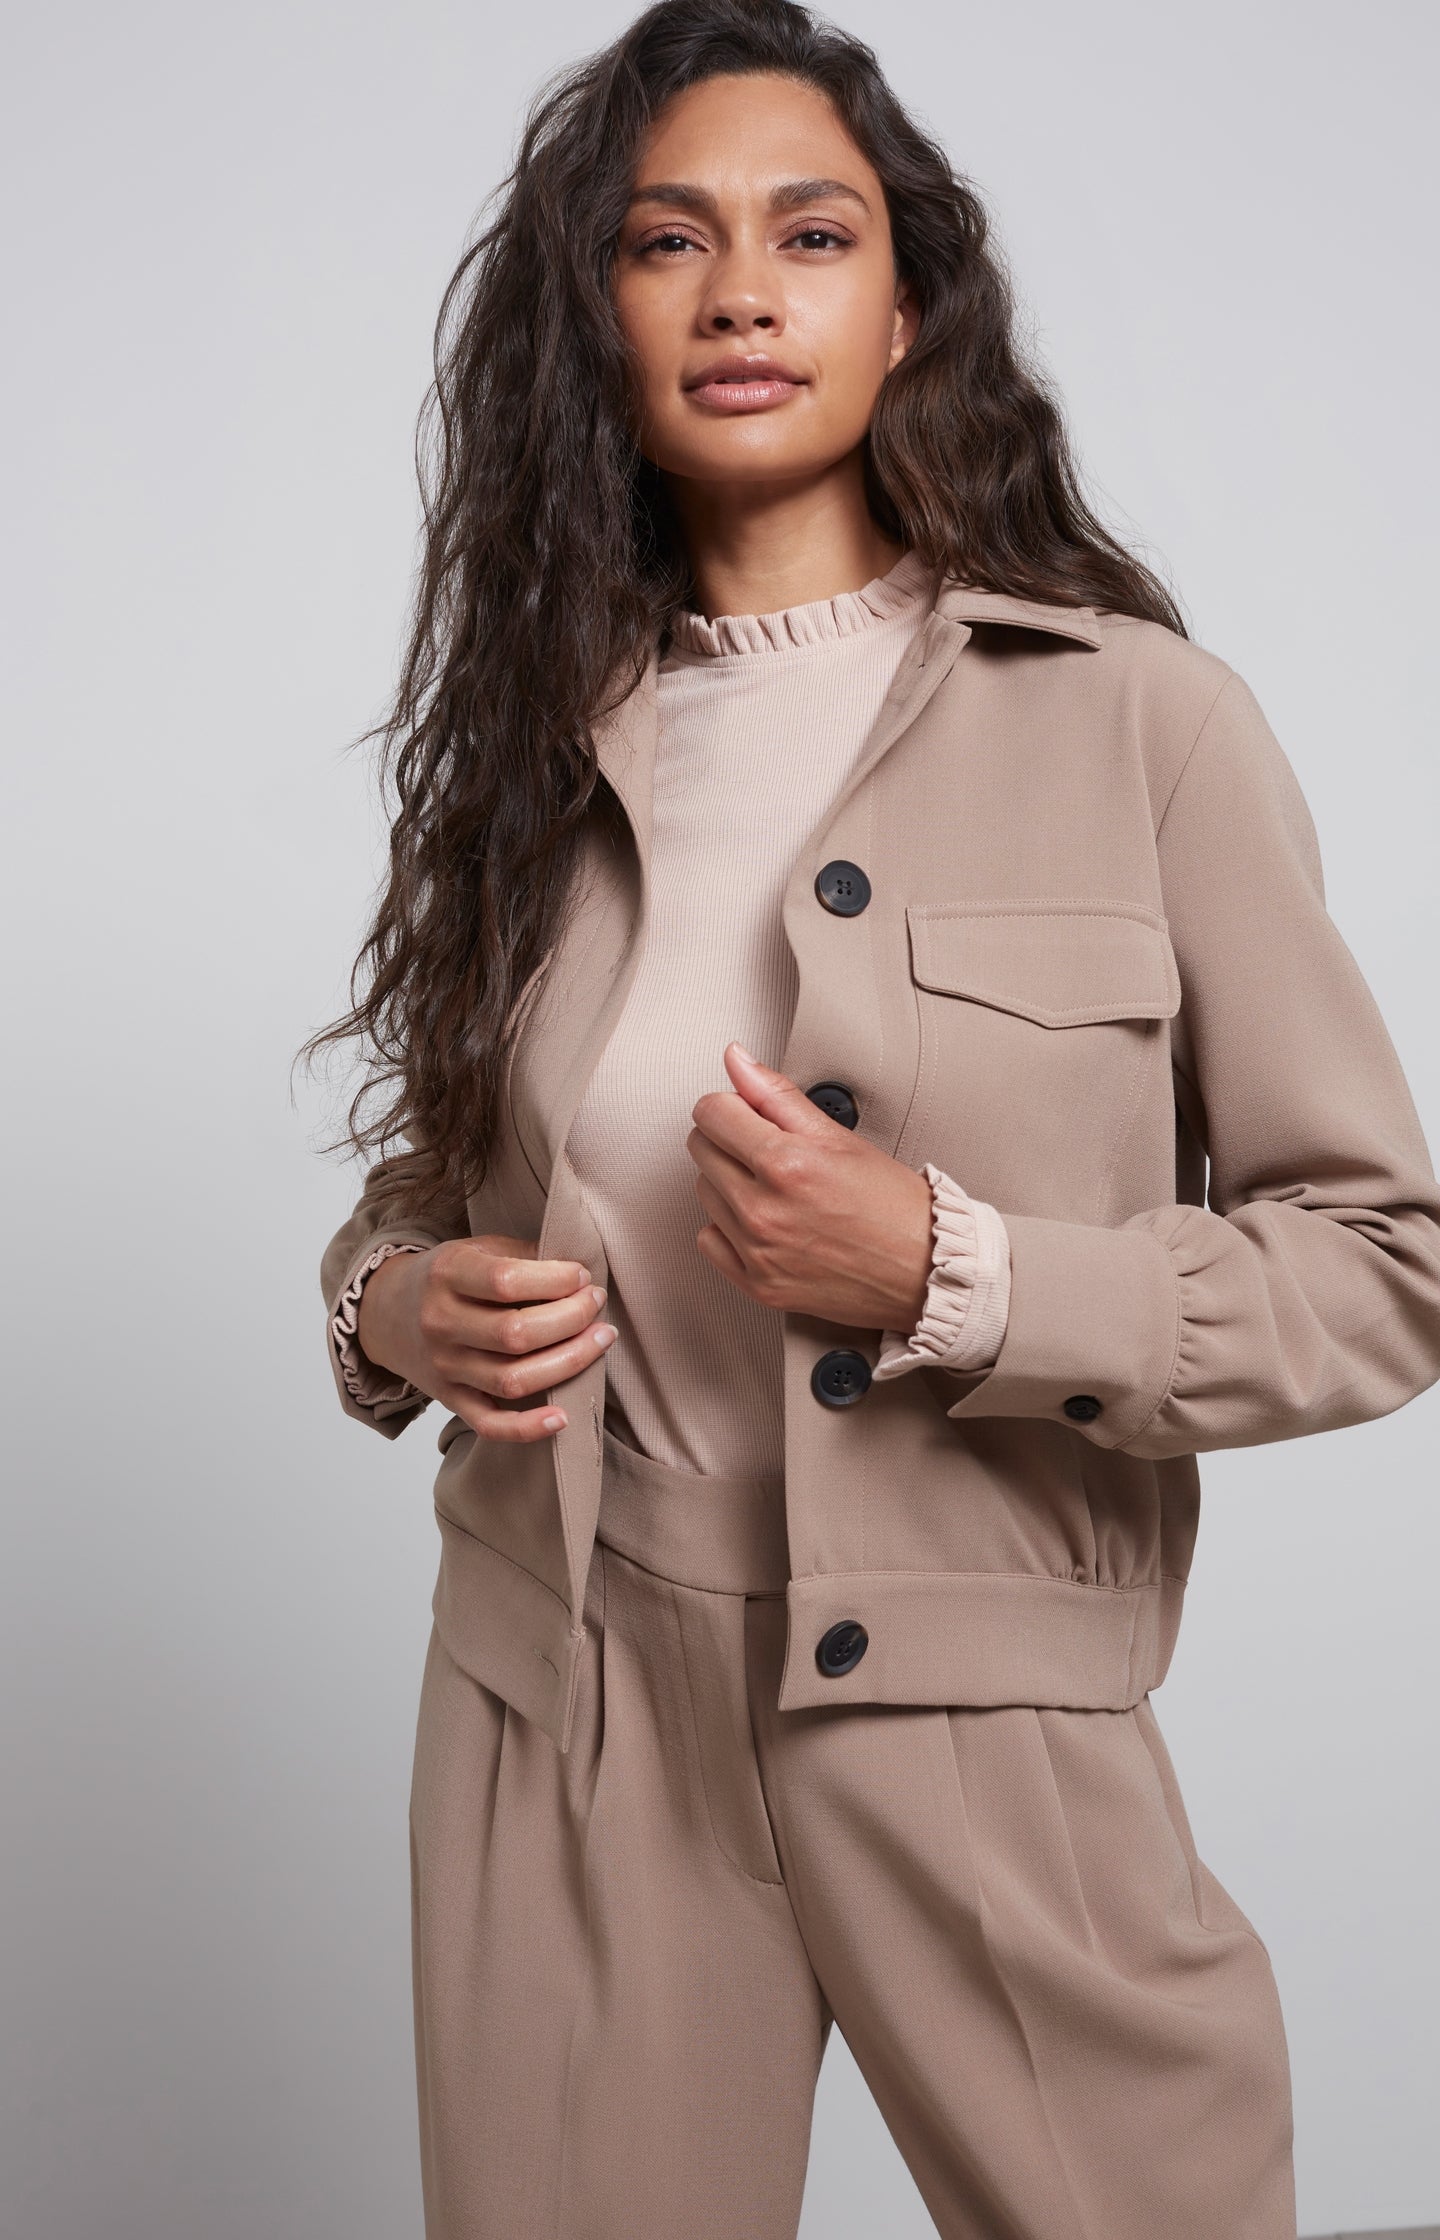 Woven jacket with long sleeves, breast pockets and buttons